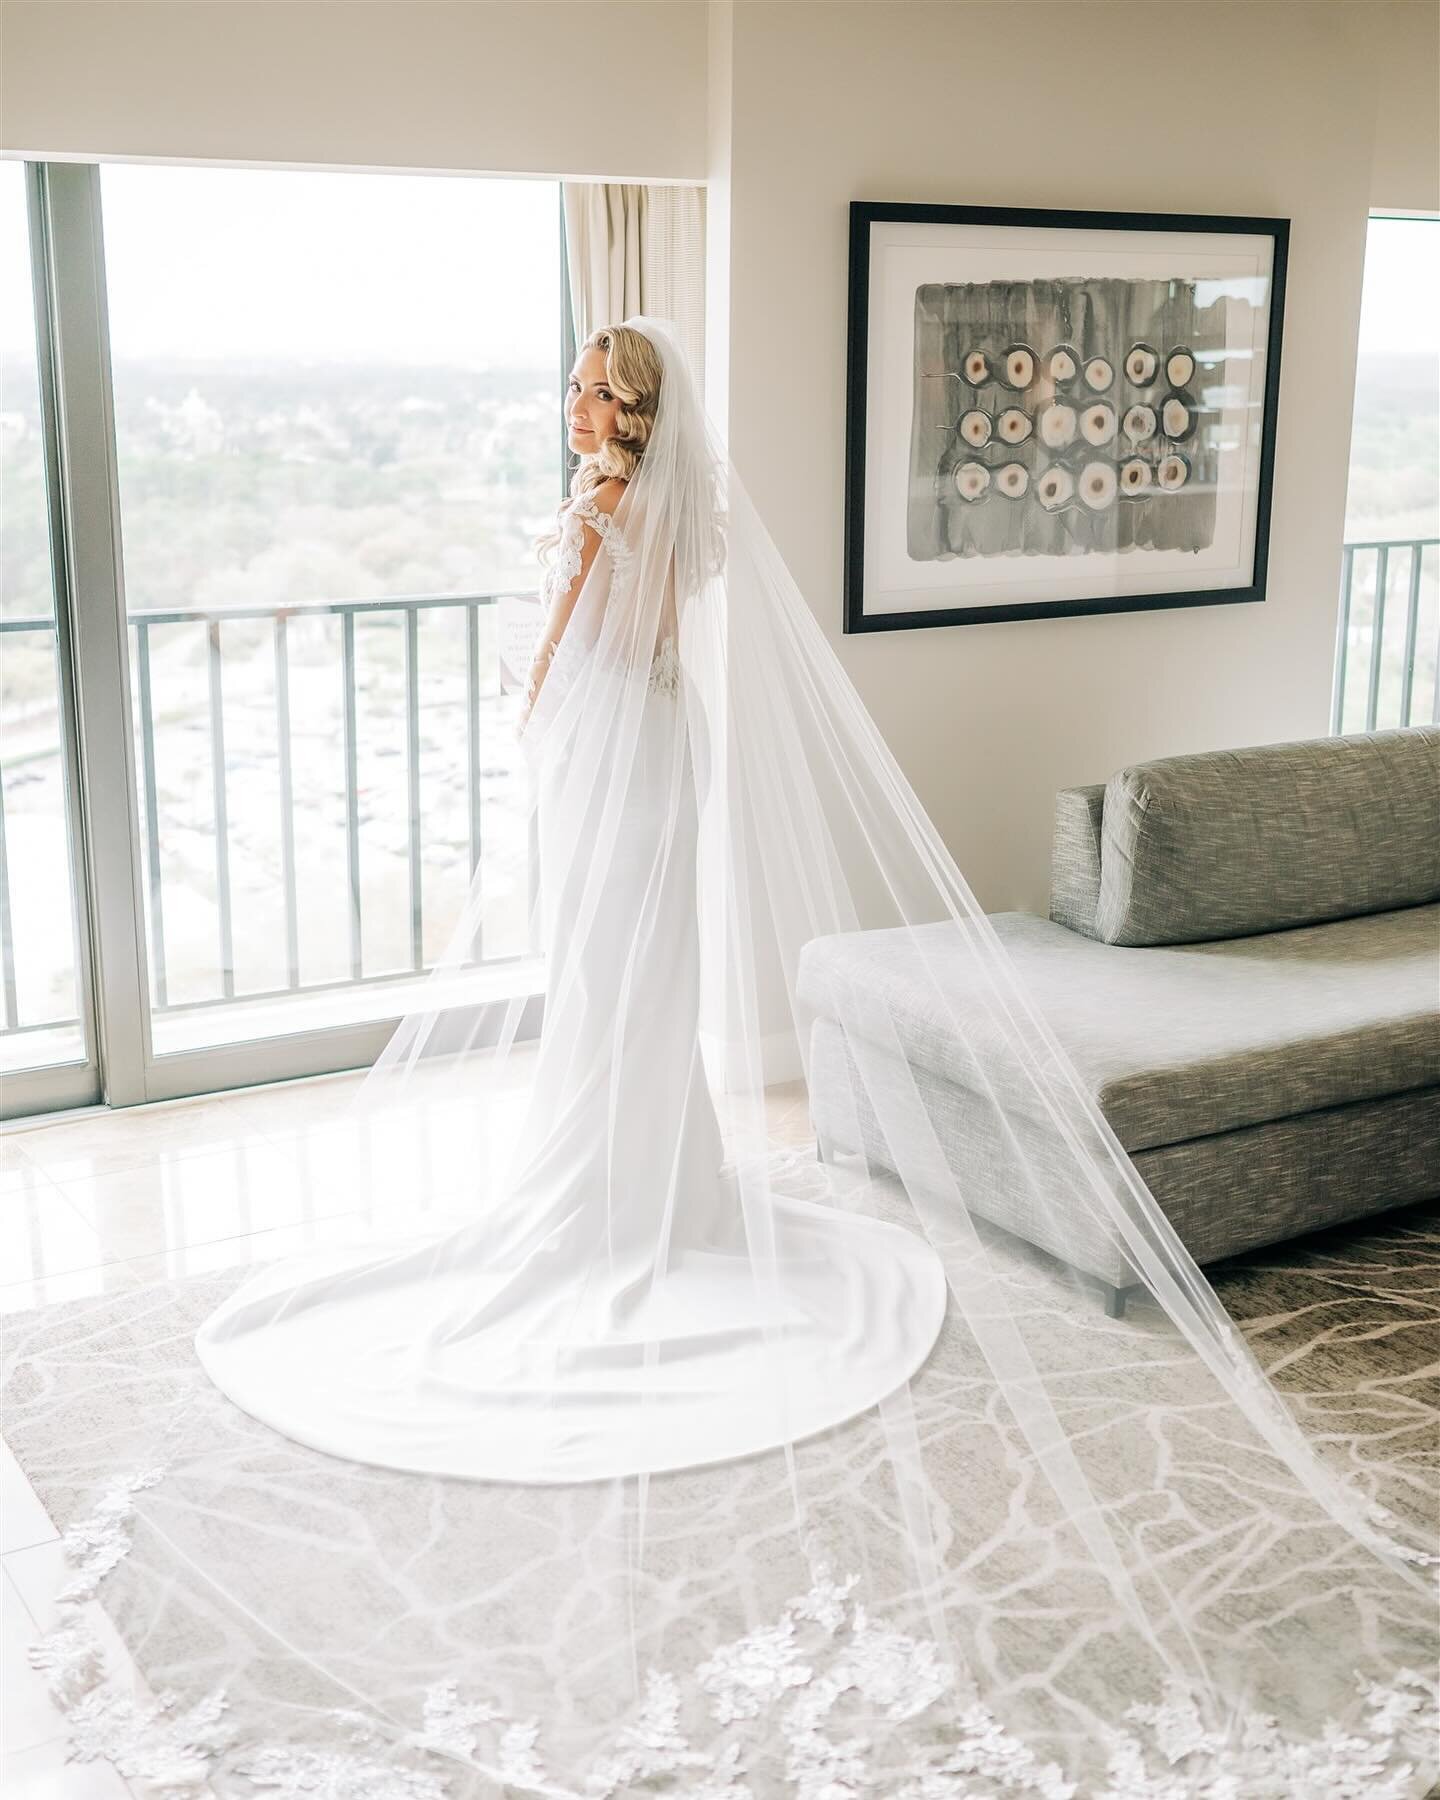 When your bride looks like a movie star 📸

@allthedetailsbydanielle
@LiveFreeStories
@thefloralwayevents
@Soundwave_dj_Lighting
@moonstone.artistry
@Thebridalfinery
@theGalaPhotobooth
@achairaffair
@madeandtrue
@letzdanceonit
@CalMorrismusic